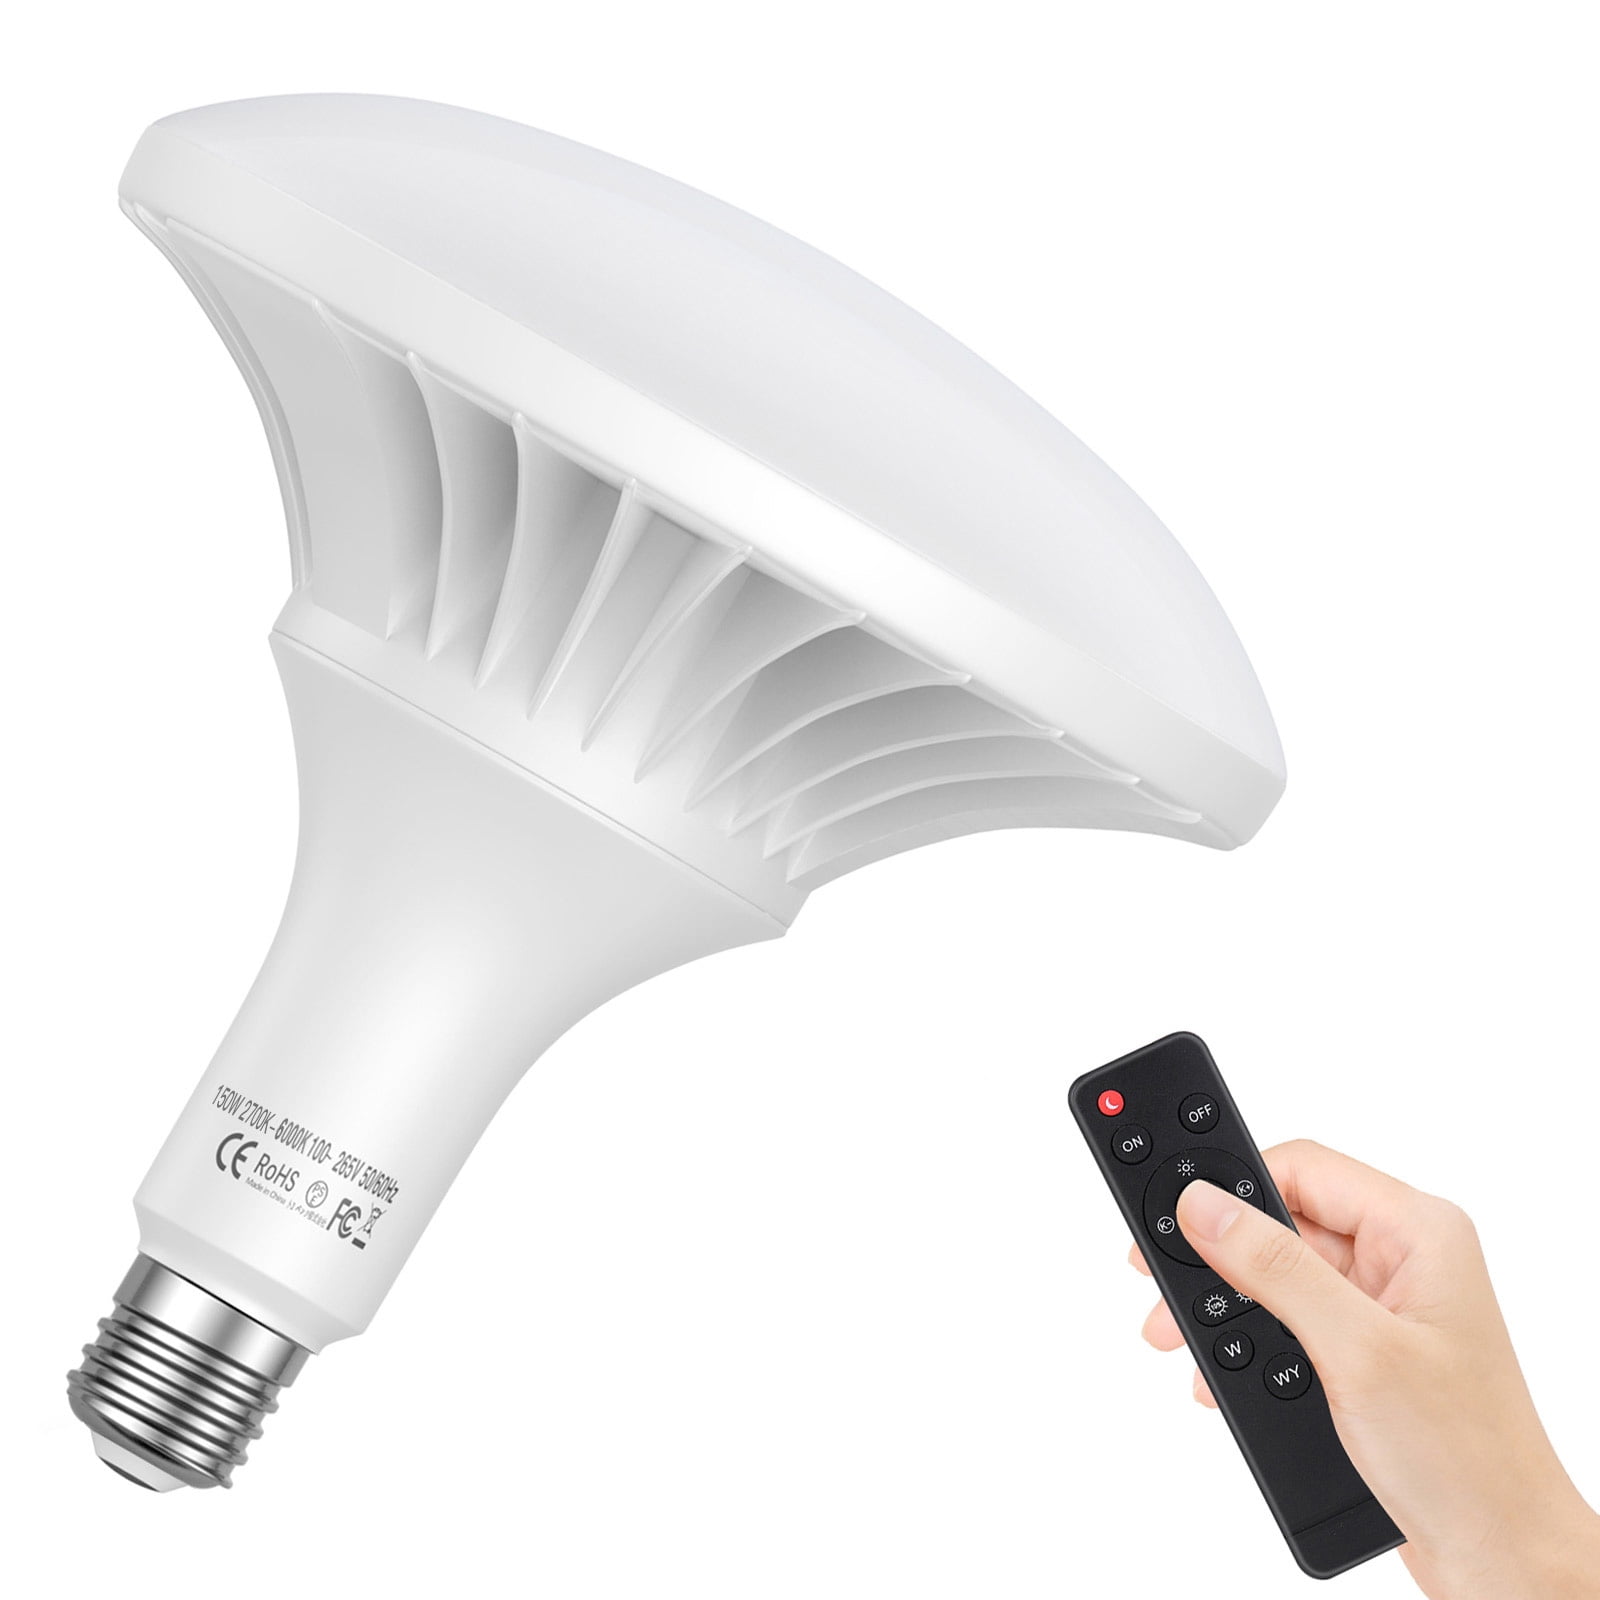 lint Baars sirene Andoer 150W LED Light Bulb Photography Lamp Bulb 3000K-6500K Dimmable  Energy-saving E27 Mount with Remote Control for Photography Studio Home  Warehouse Office Hotel - Walmart.com